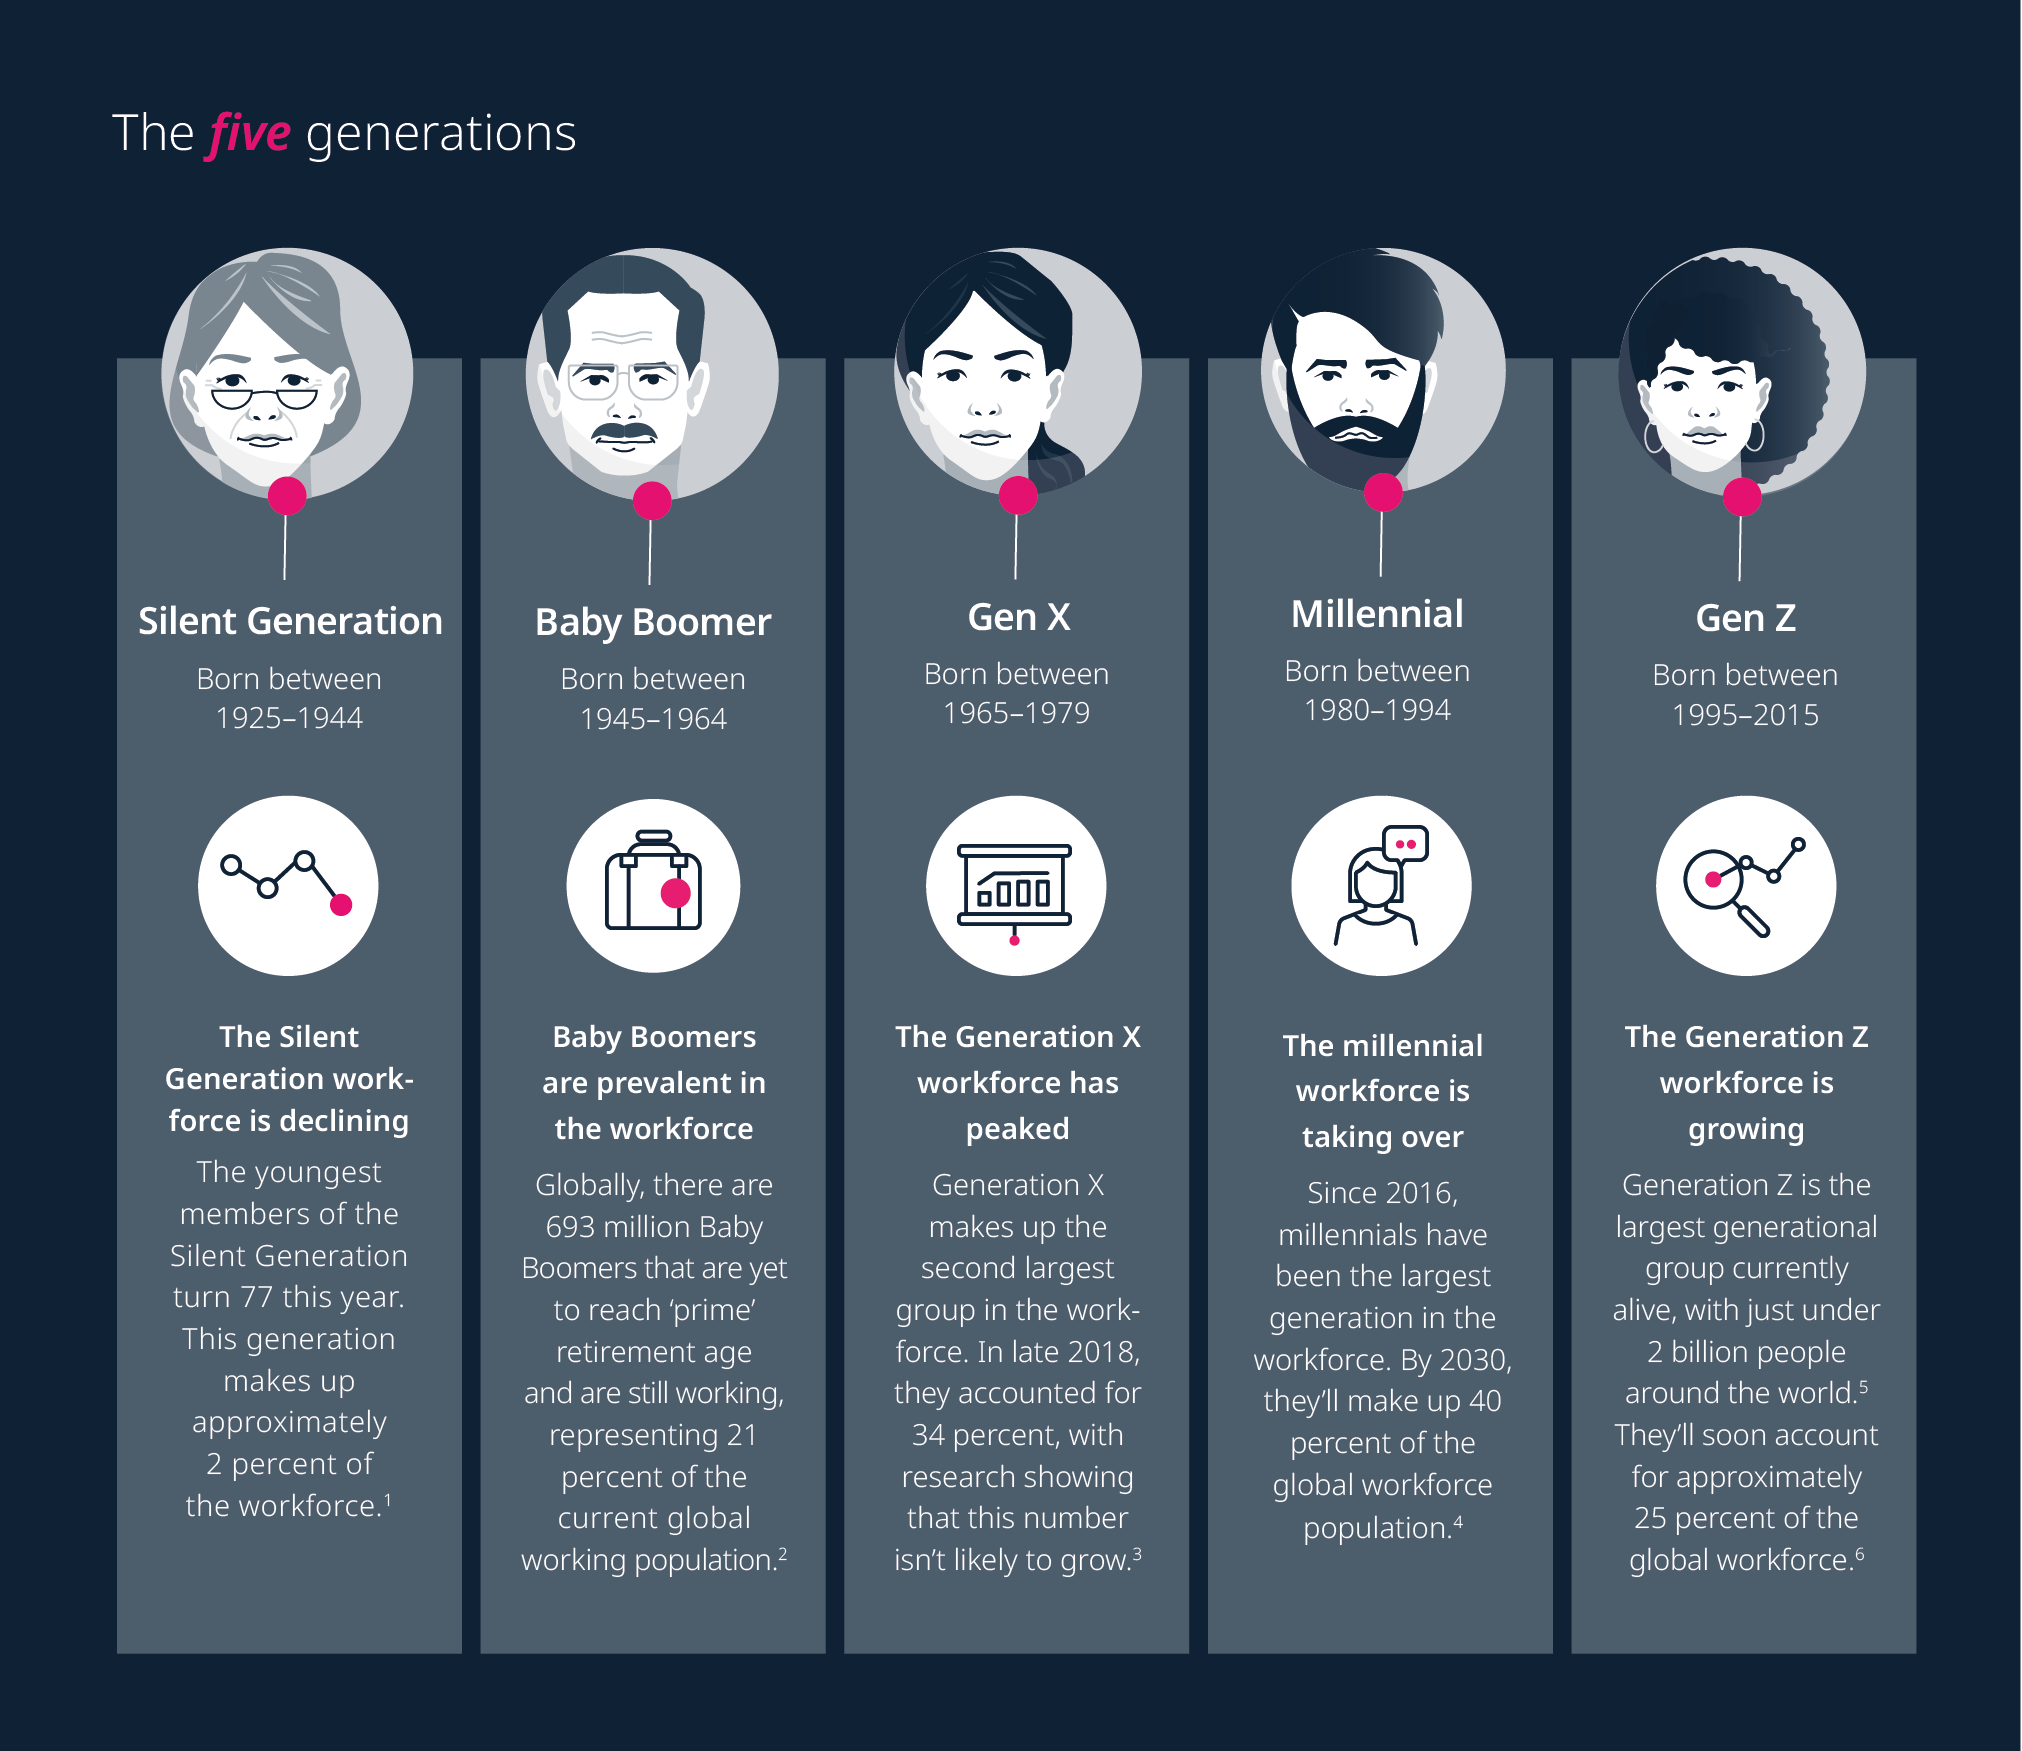 The five generations in the workplace